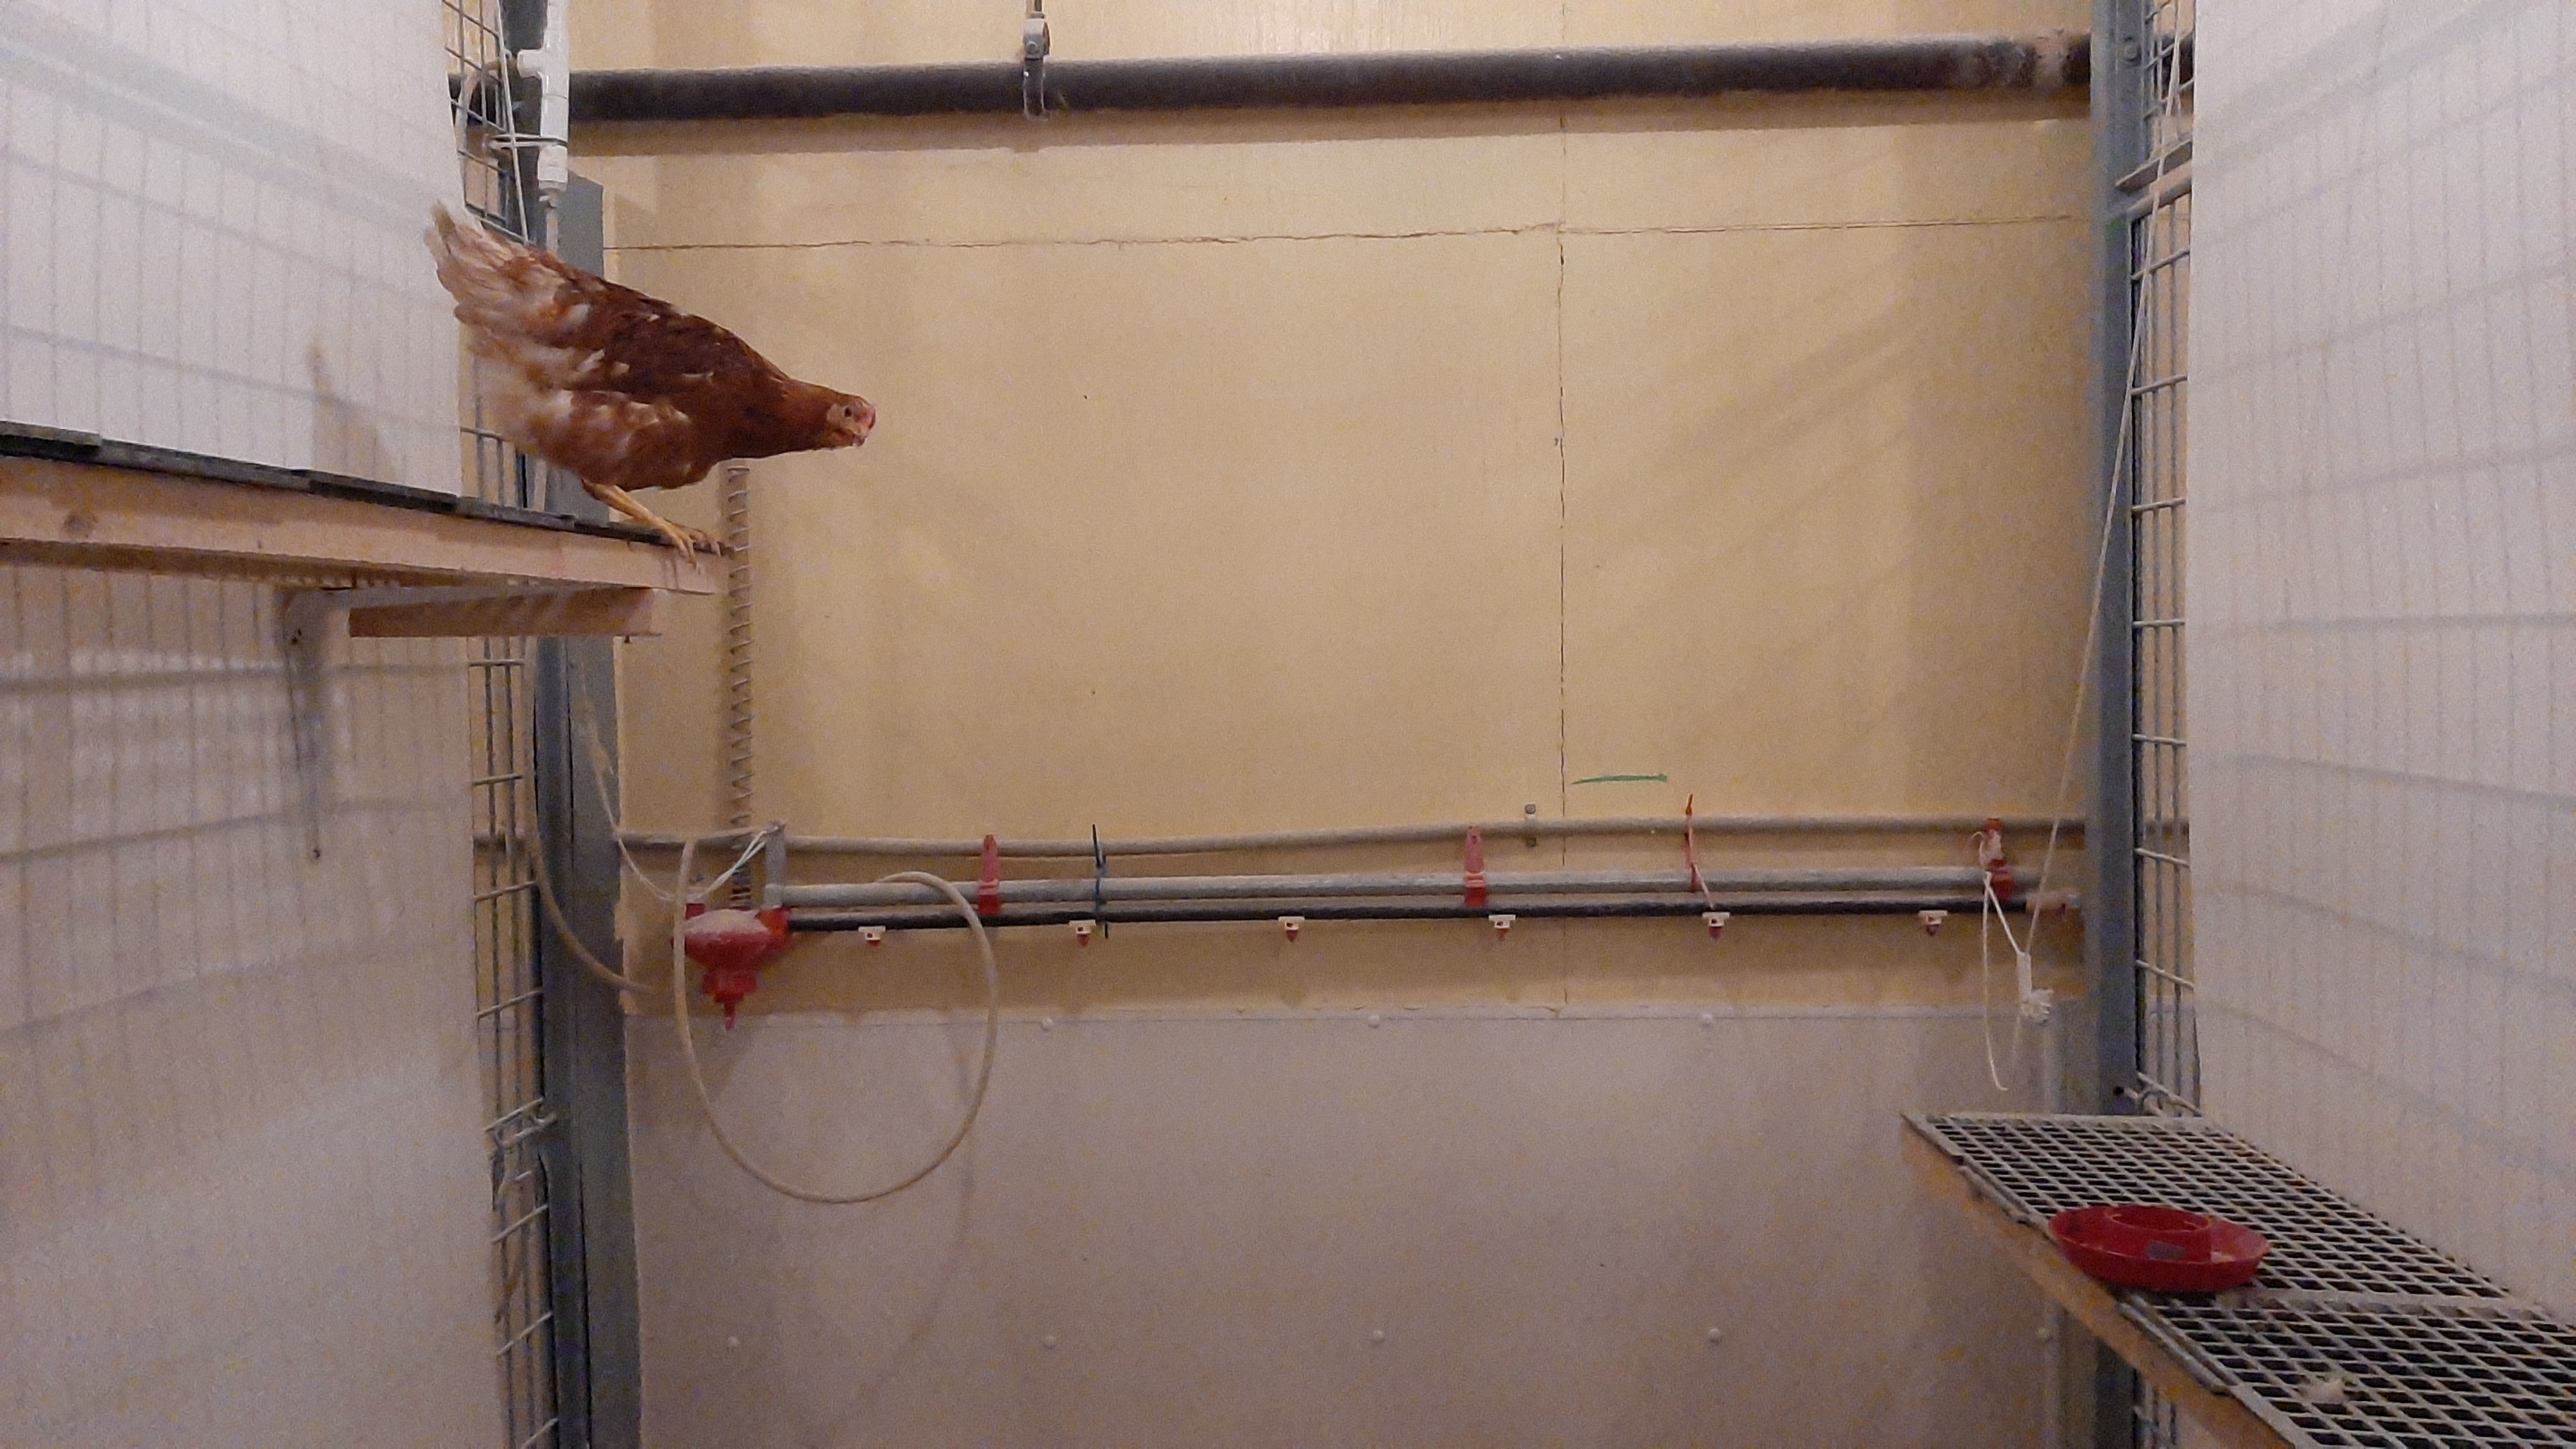 a pullet is asked to jump from one elevated platform to another